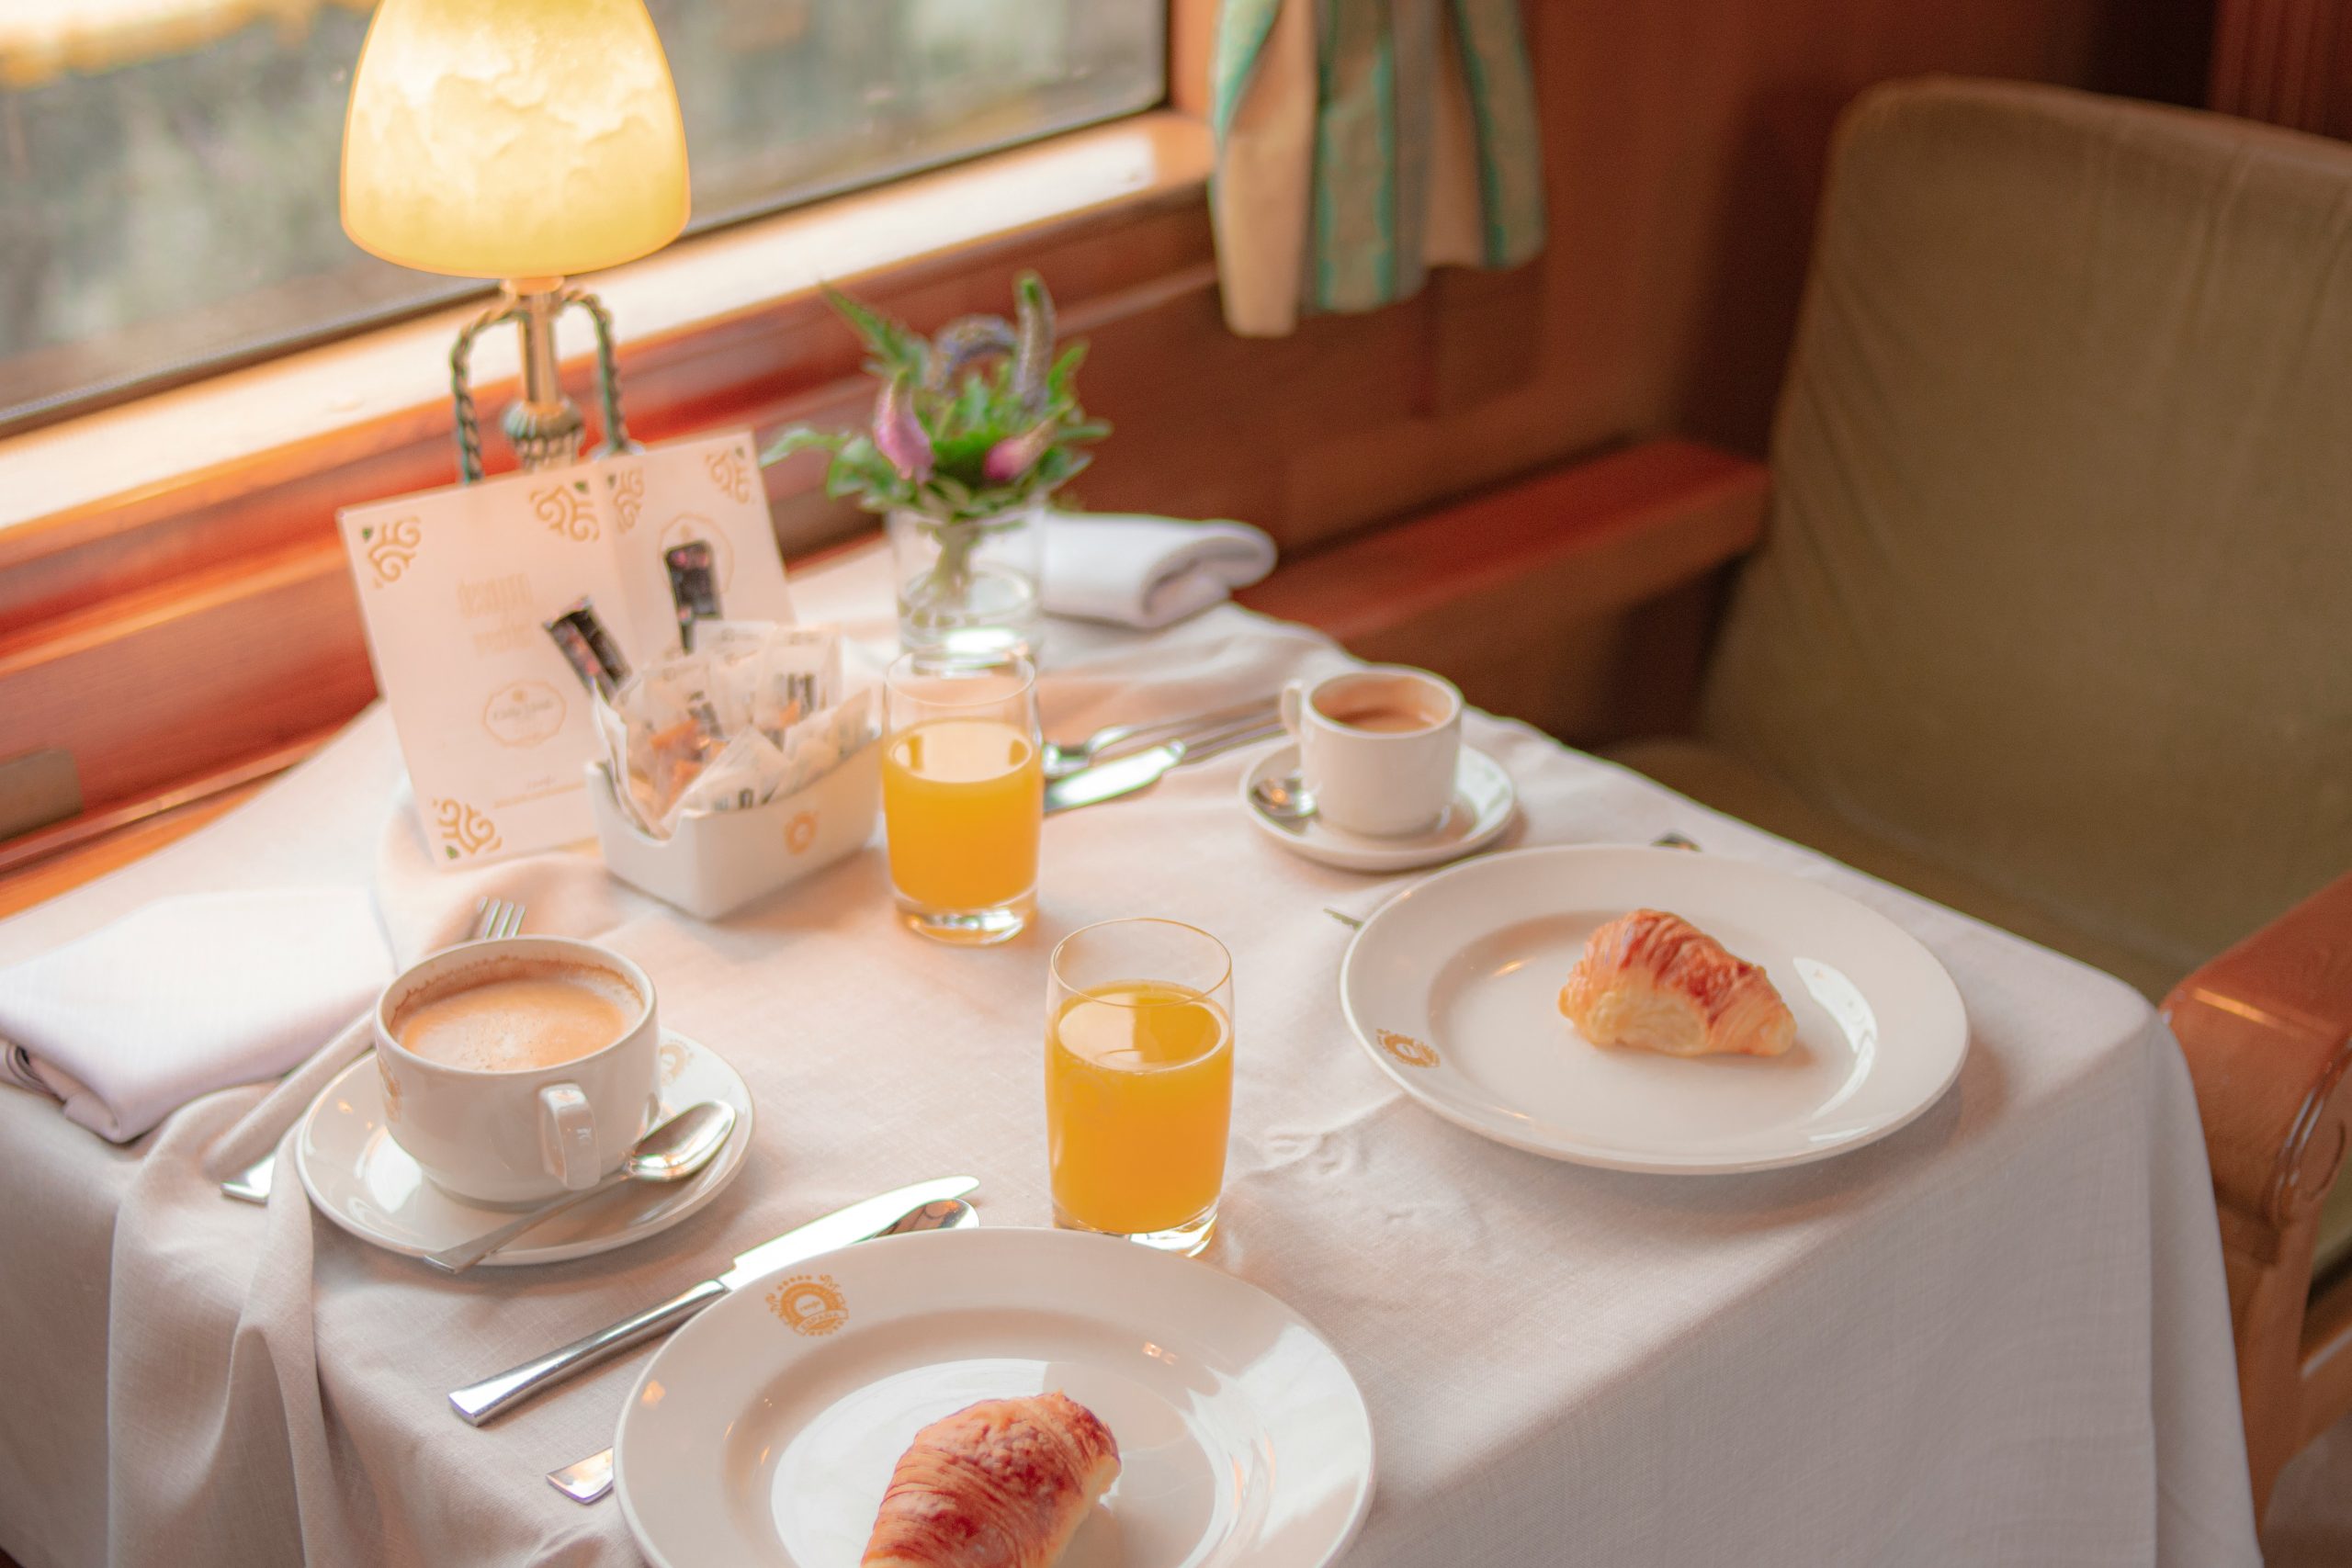 discover the world in luxury and style aboard our luxurious trains. experience unrivaled comfort and world-class service as you journey through breathtaking landscapes.